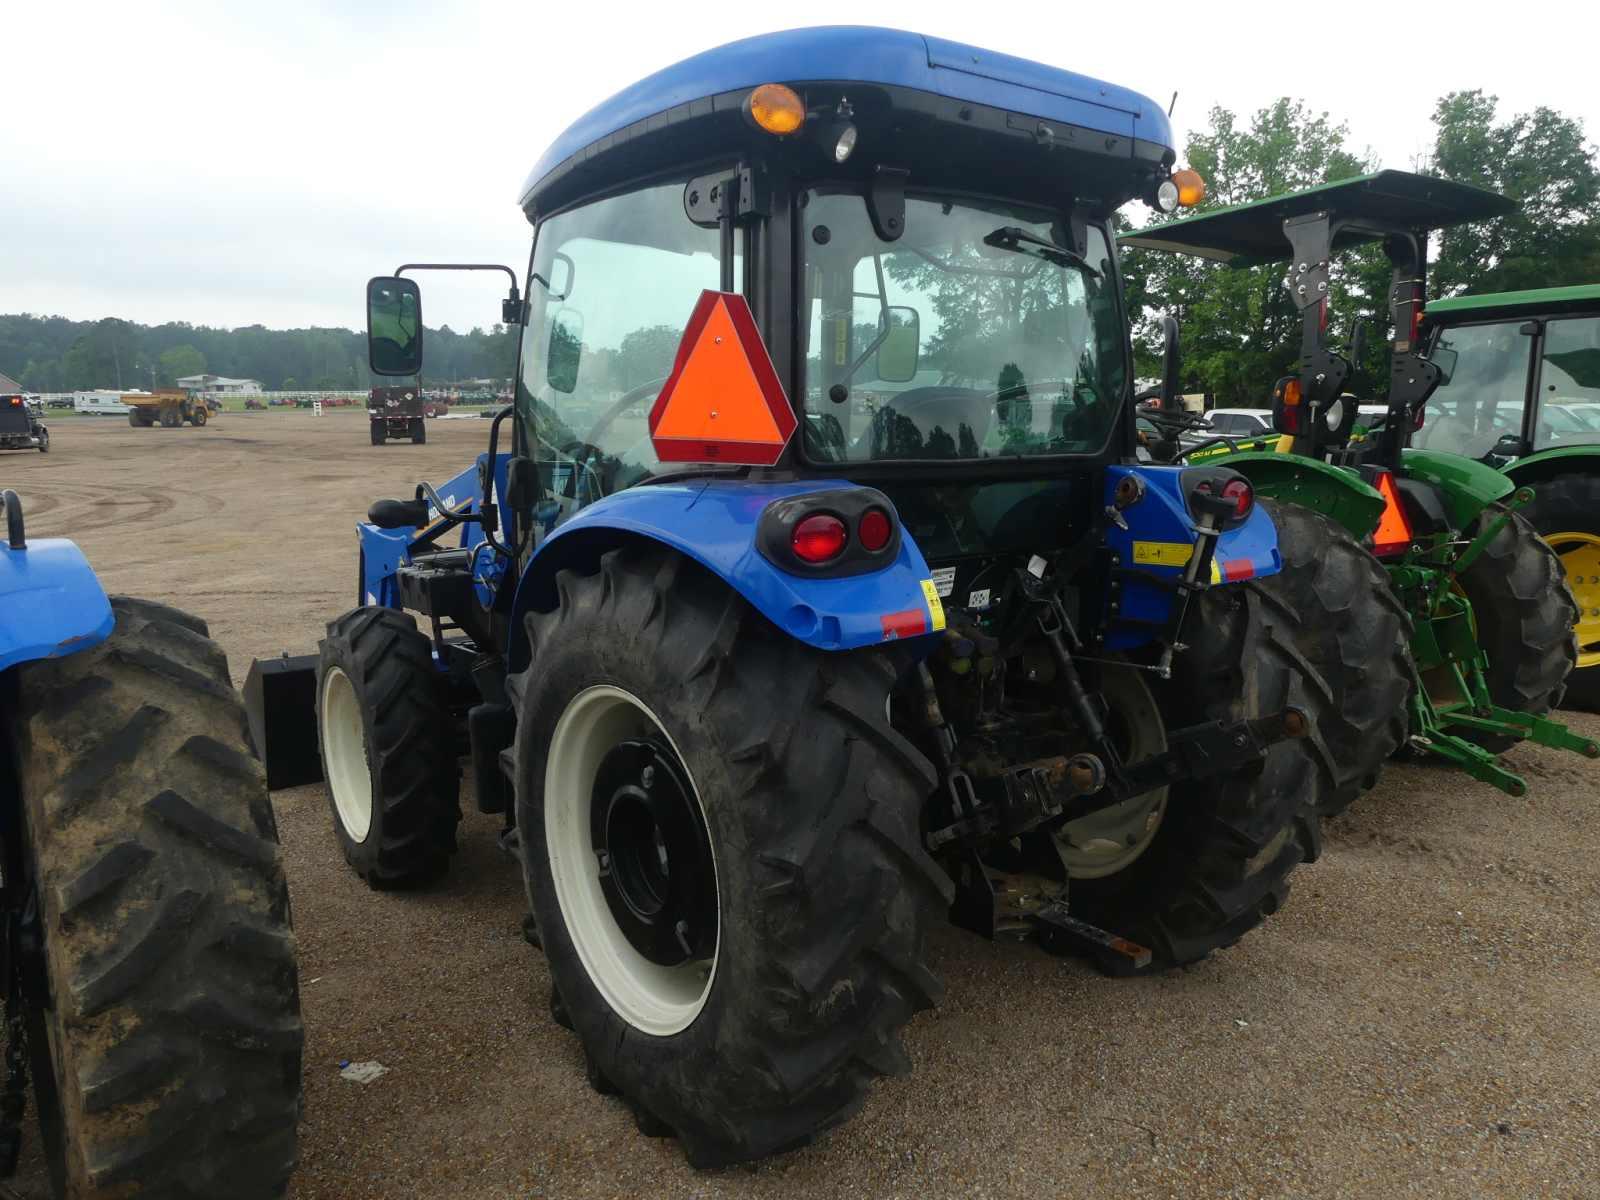 2022 New Holland Workmaster 75 MFWD Tractor, s/n ELRT4S75LNAX01693: Encl. C